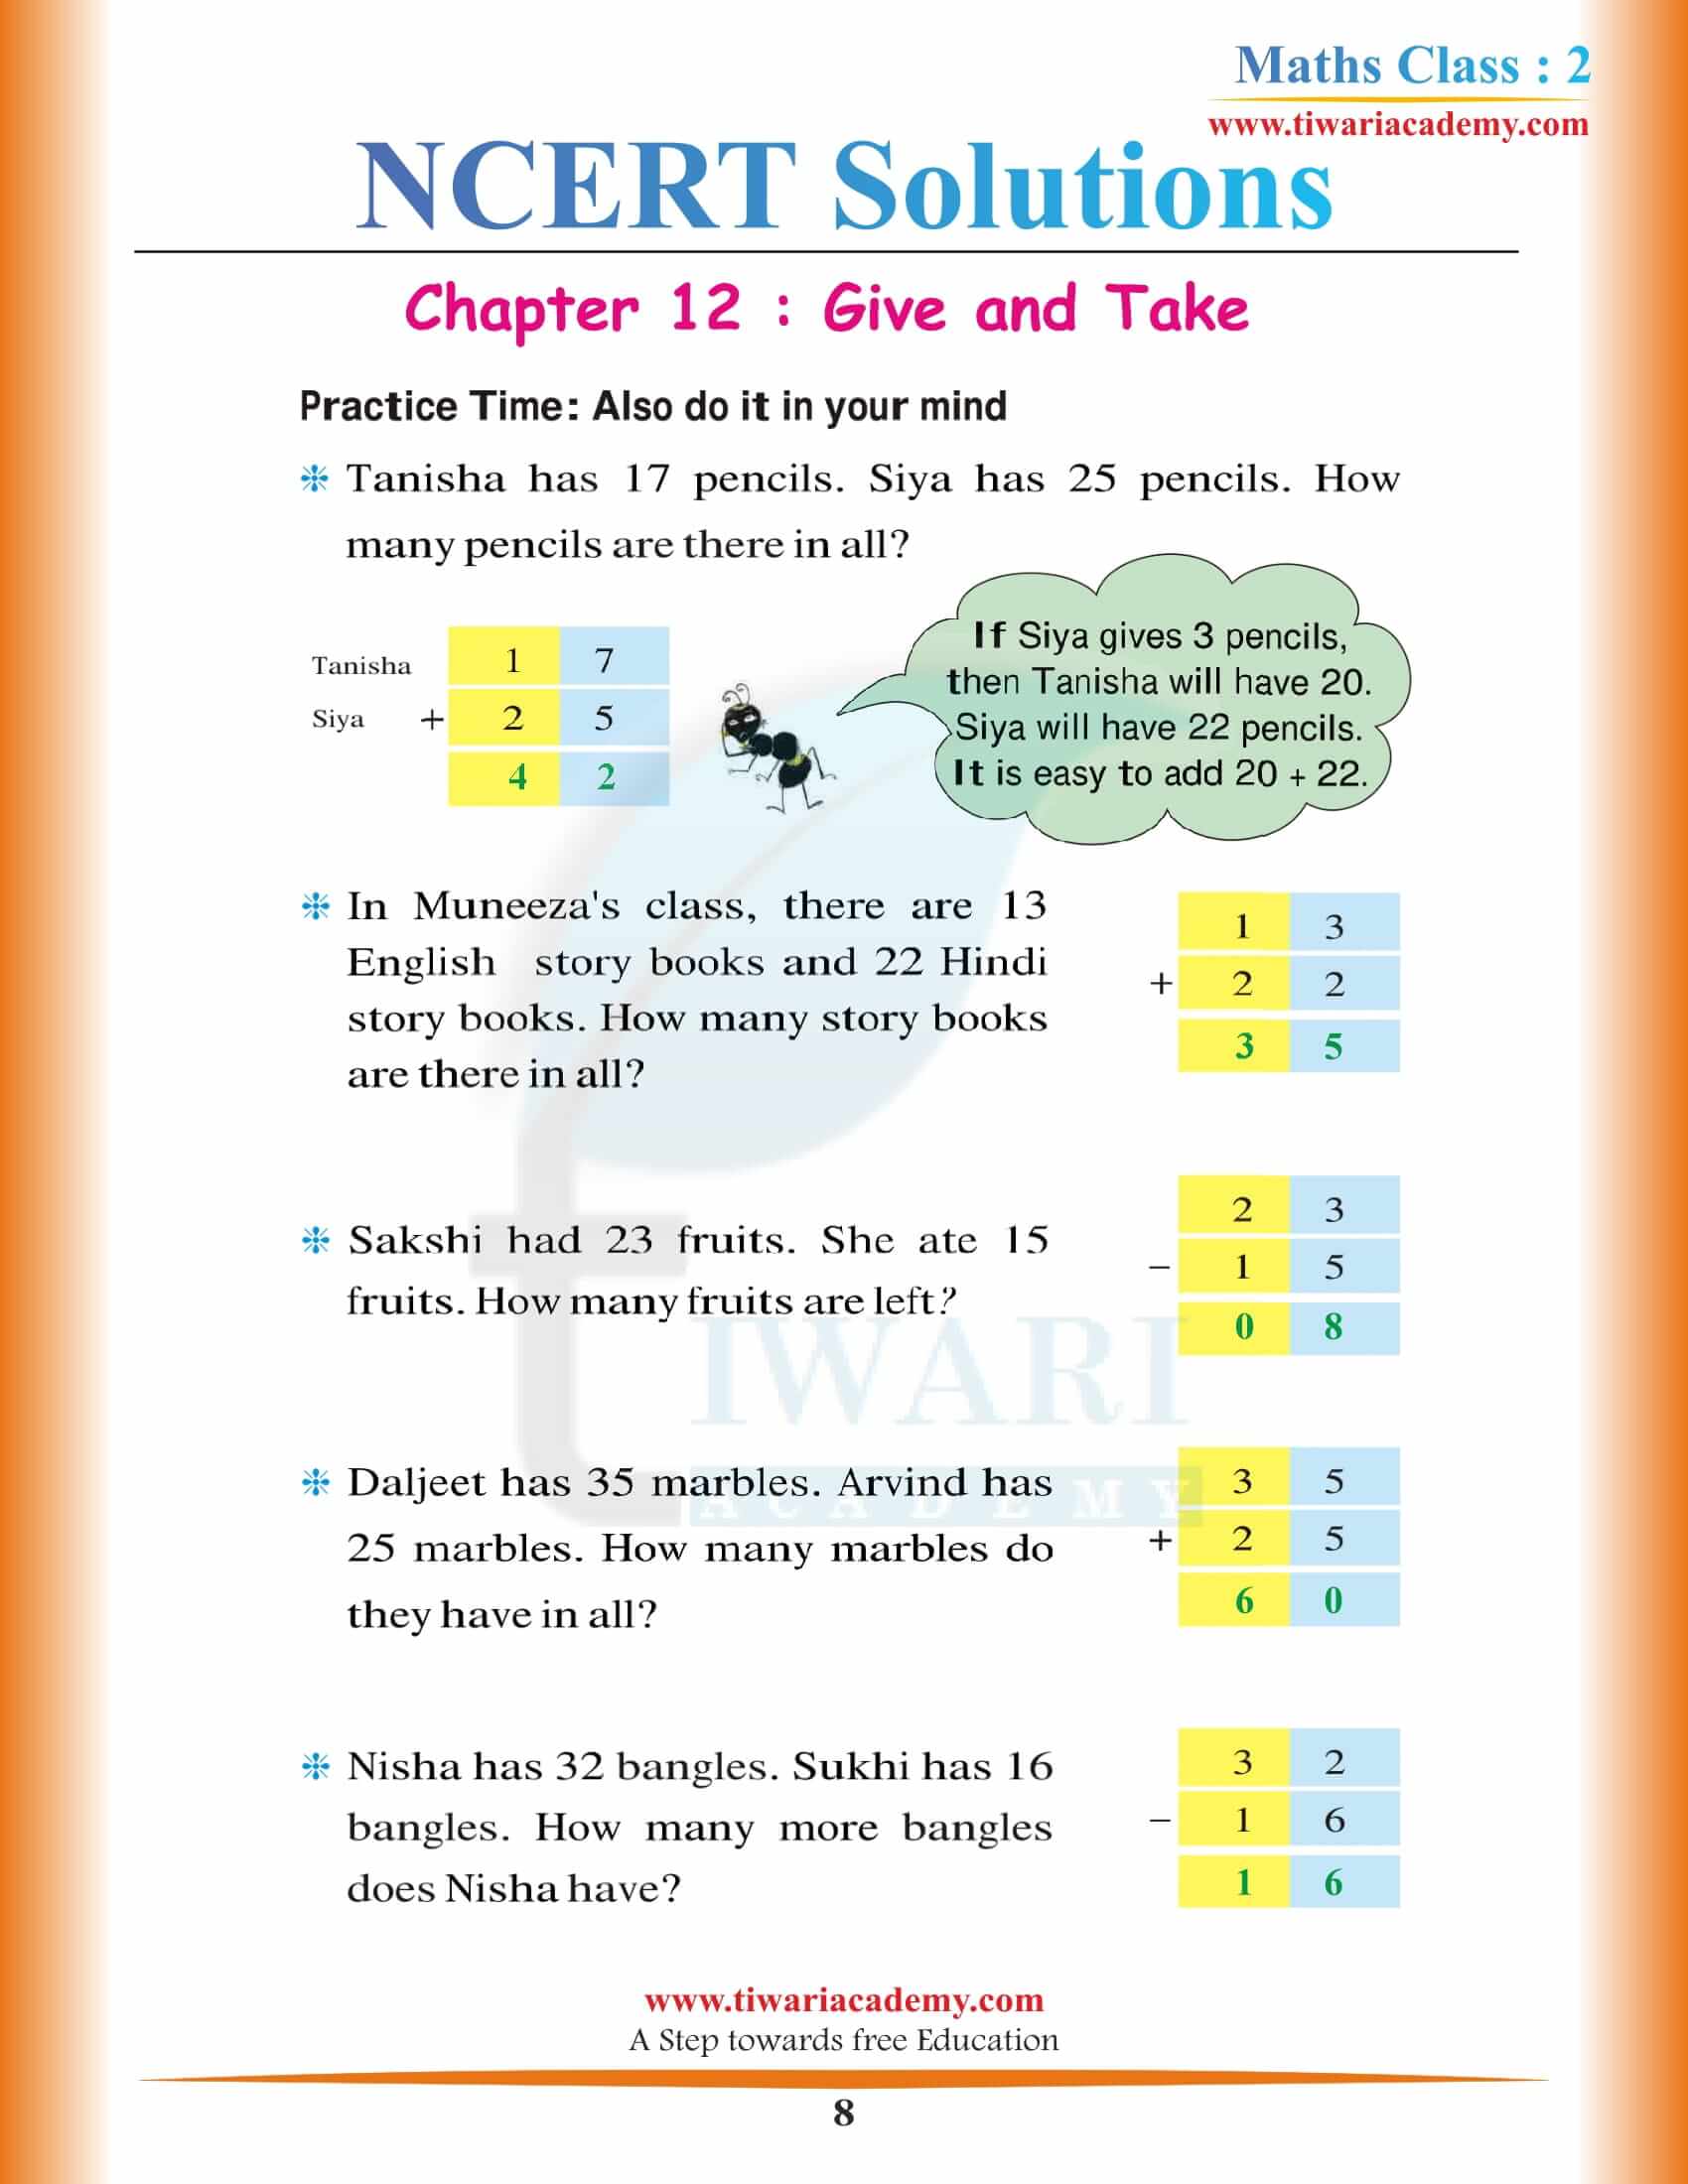 NCERT Solutions for Class 2 Maths Chapter 12 updated for new session